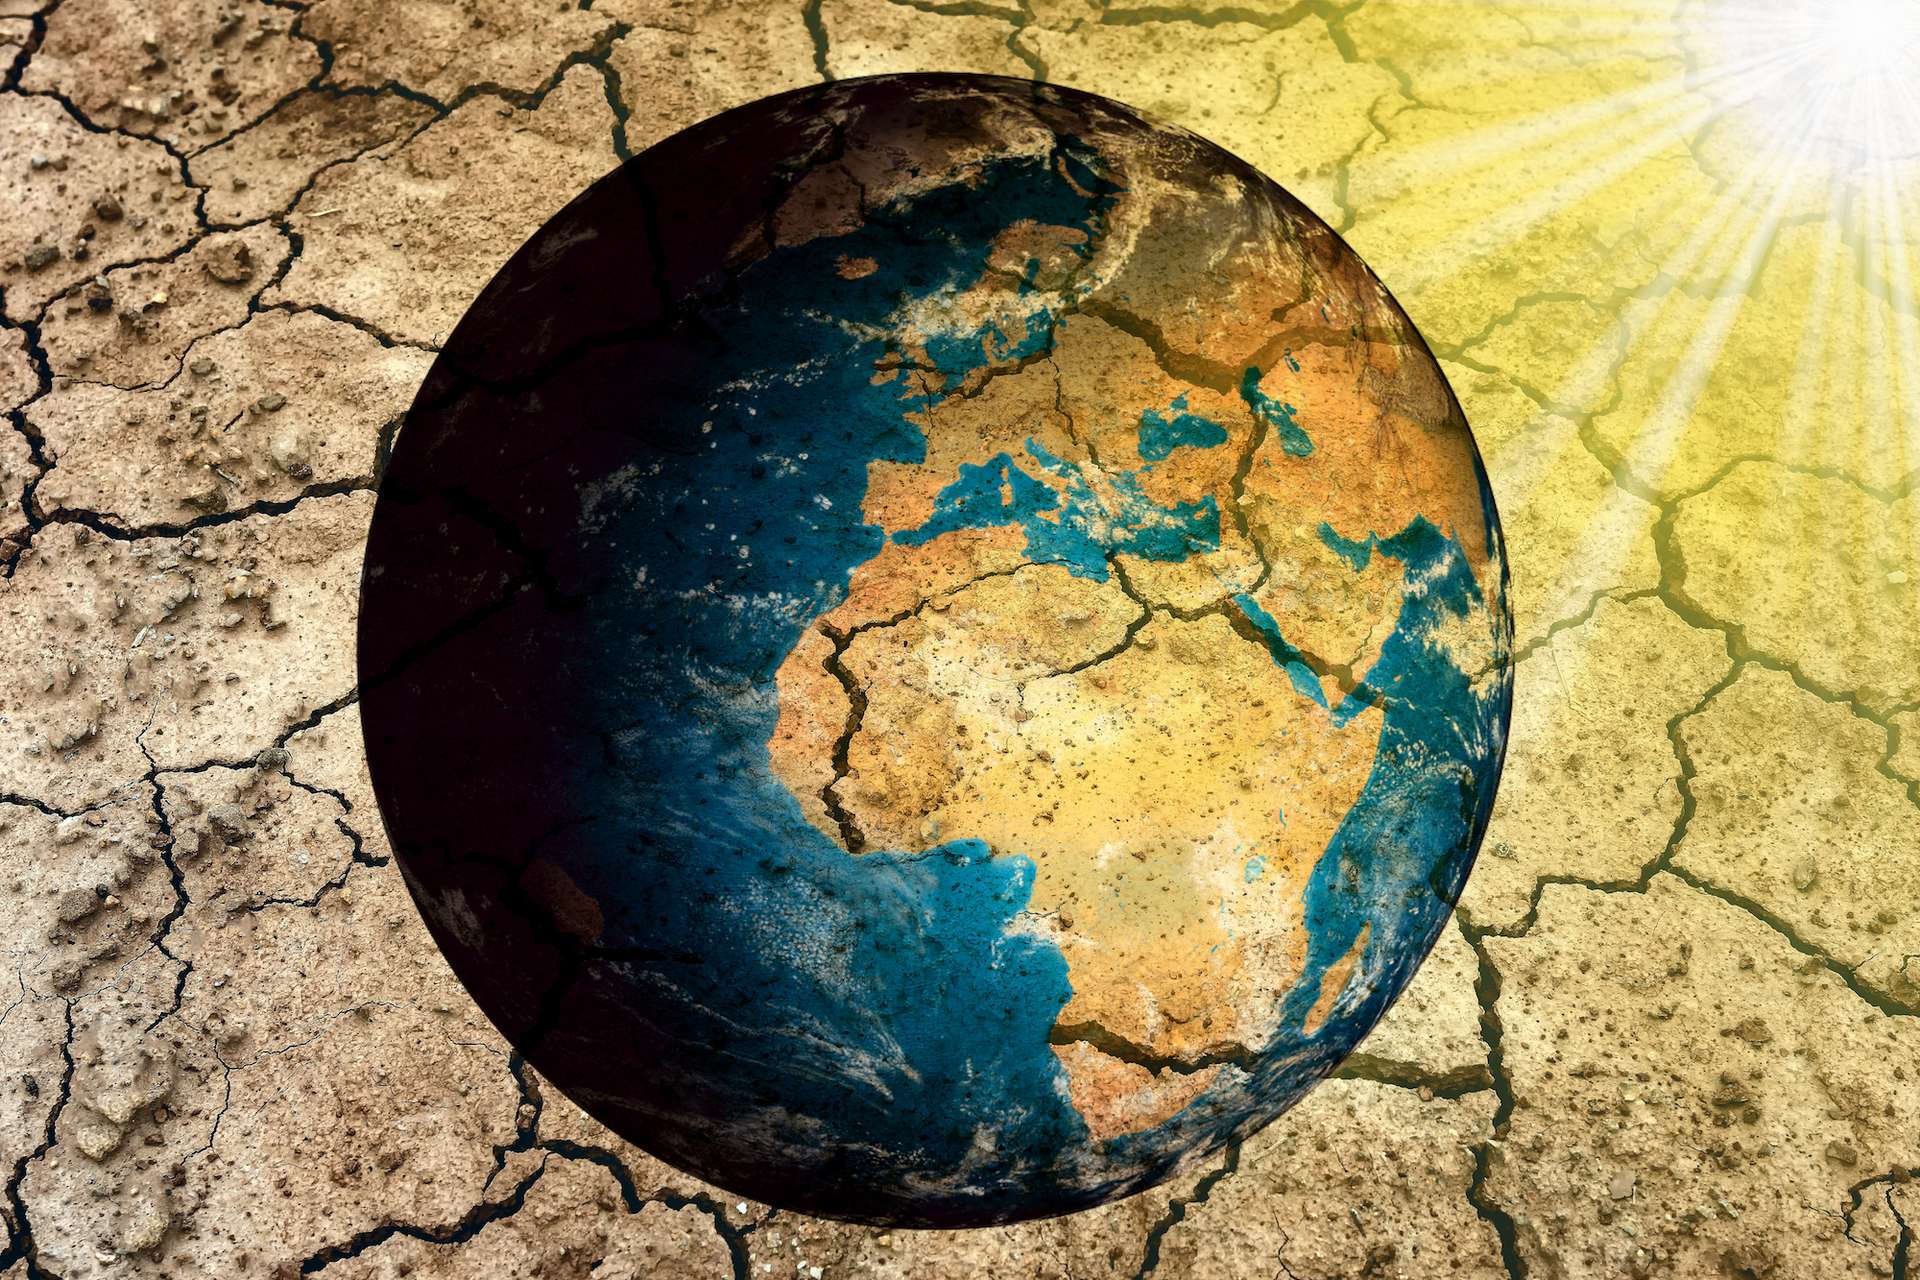 Surprising and controversial findings from a study about the onset of global warming